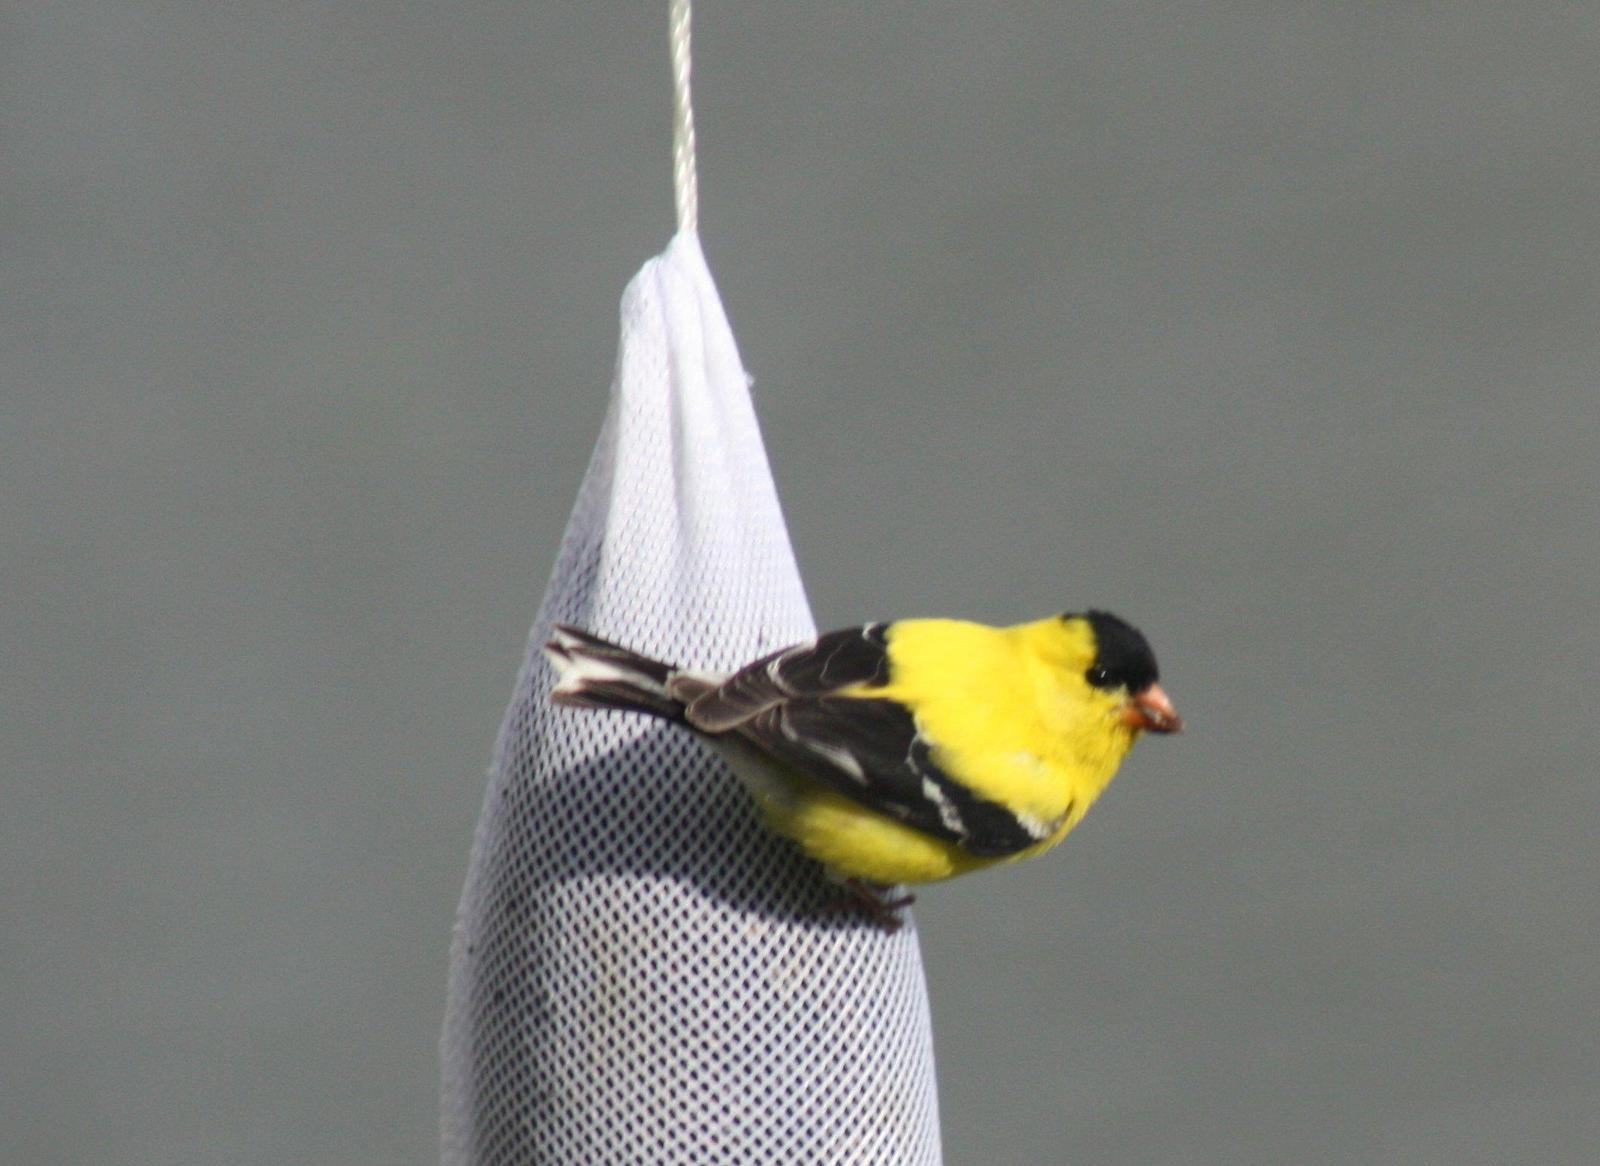 American Goldfinch Photo by Ray Watkins